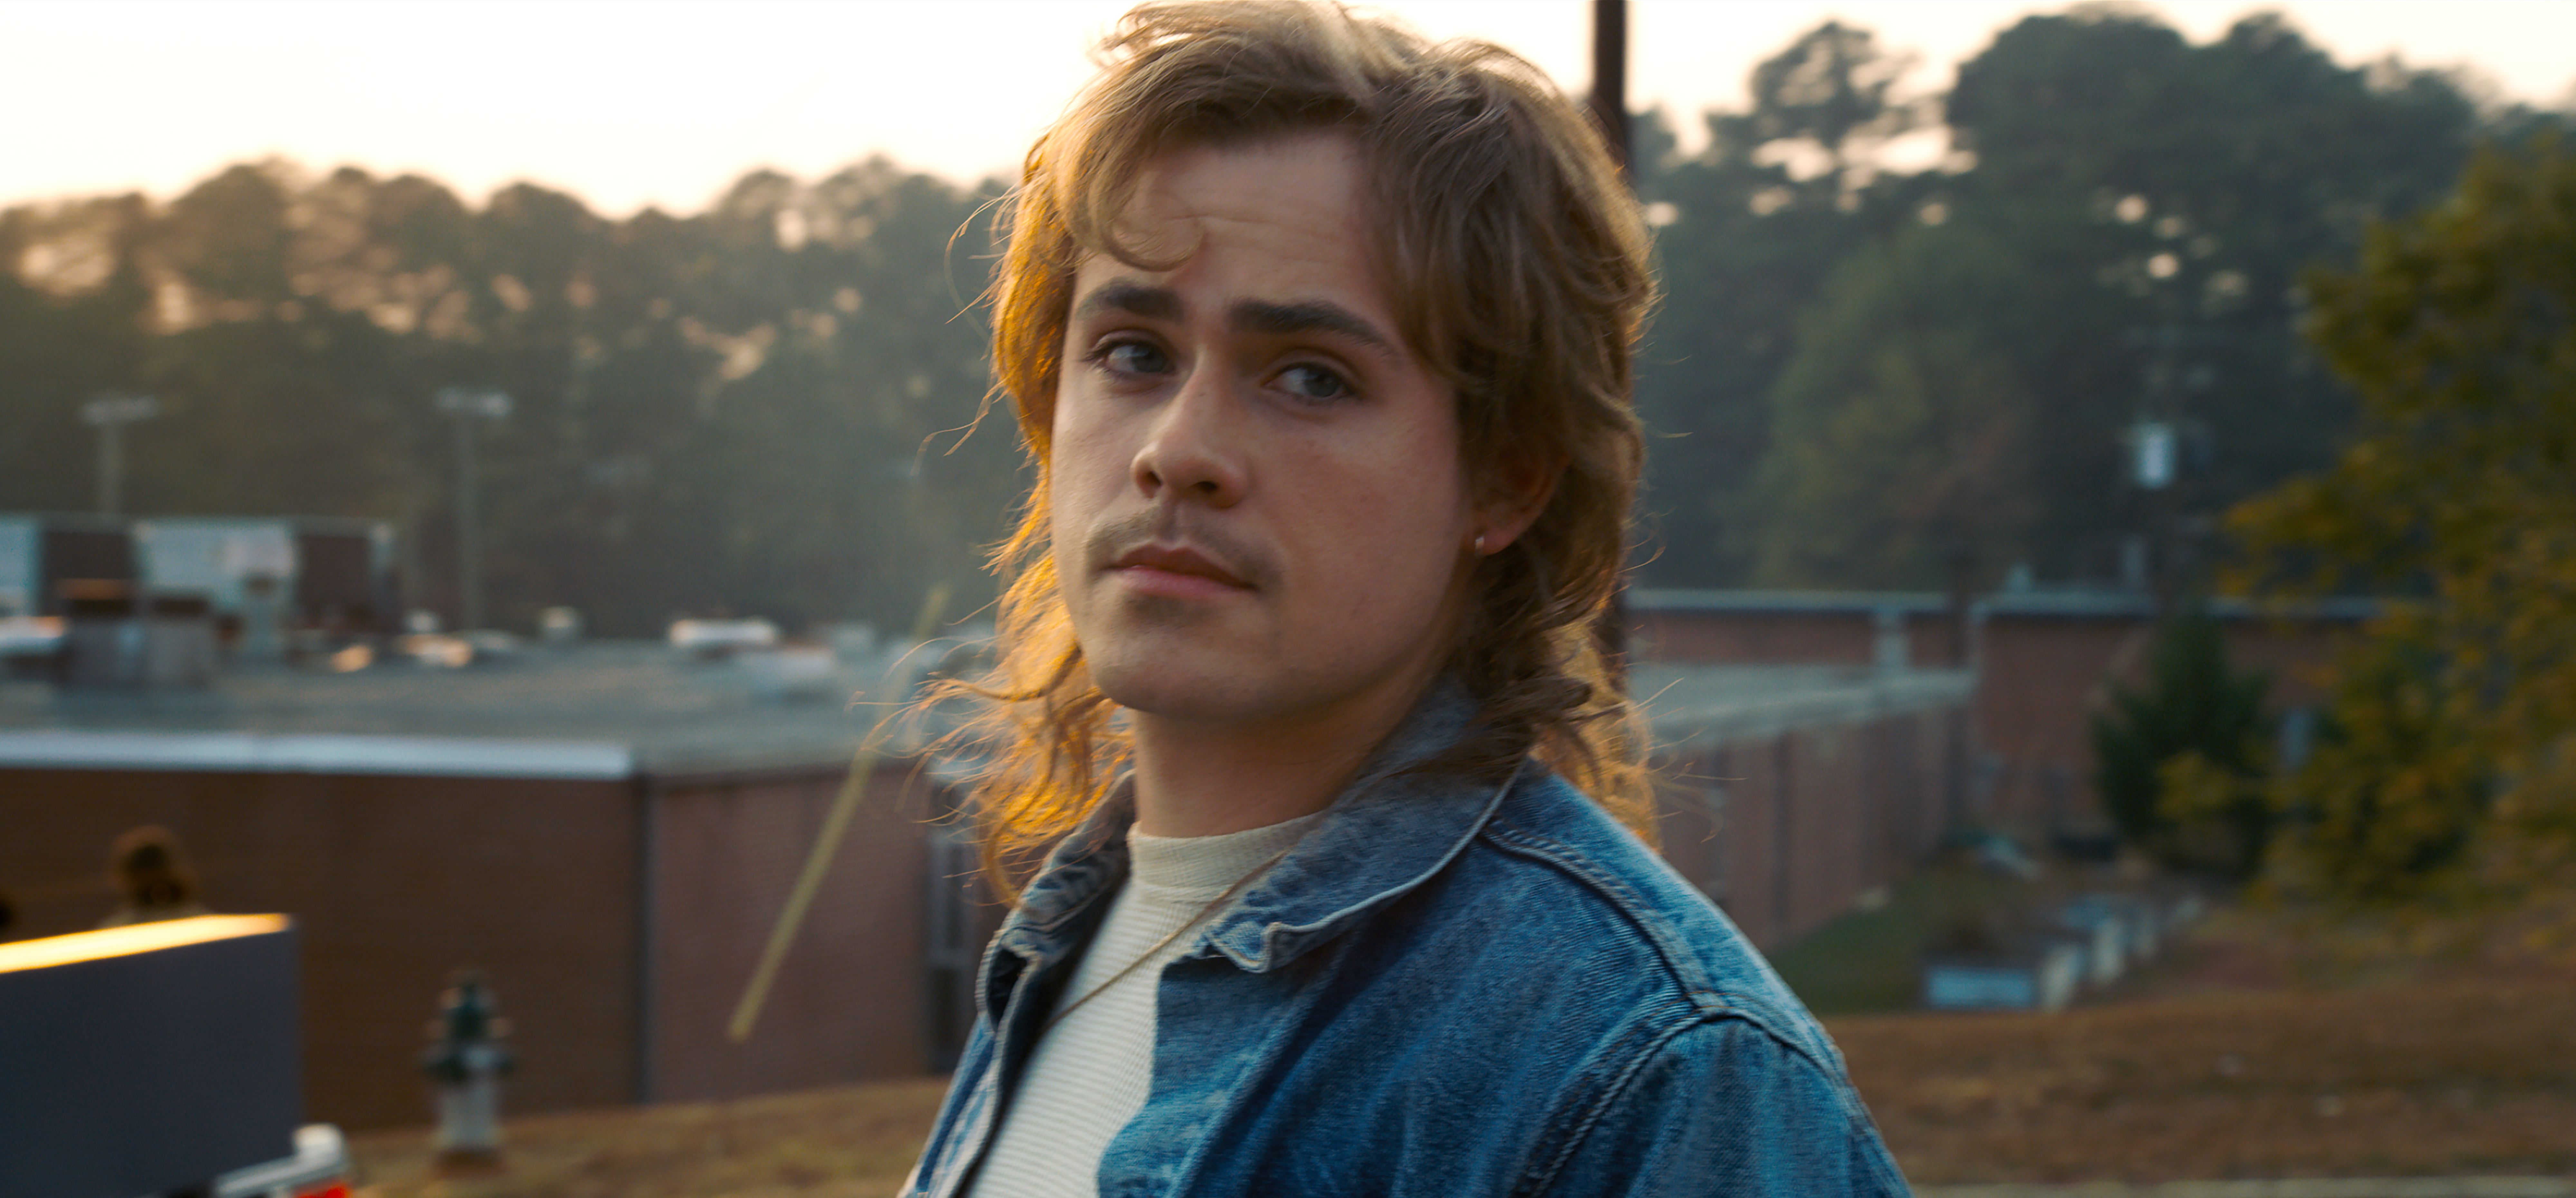 Stranger Things 2's detestable new character is impossible not to